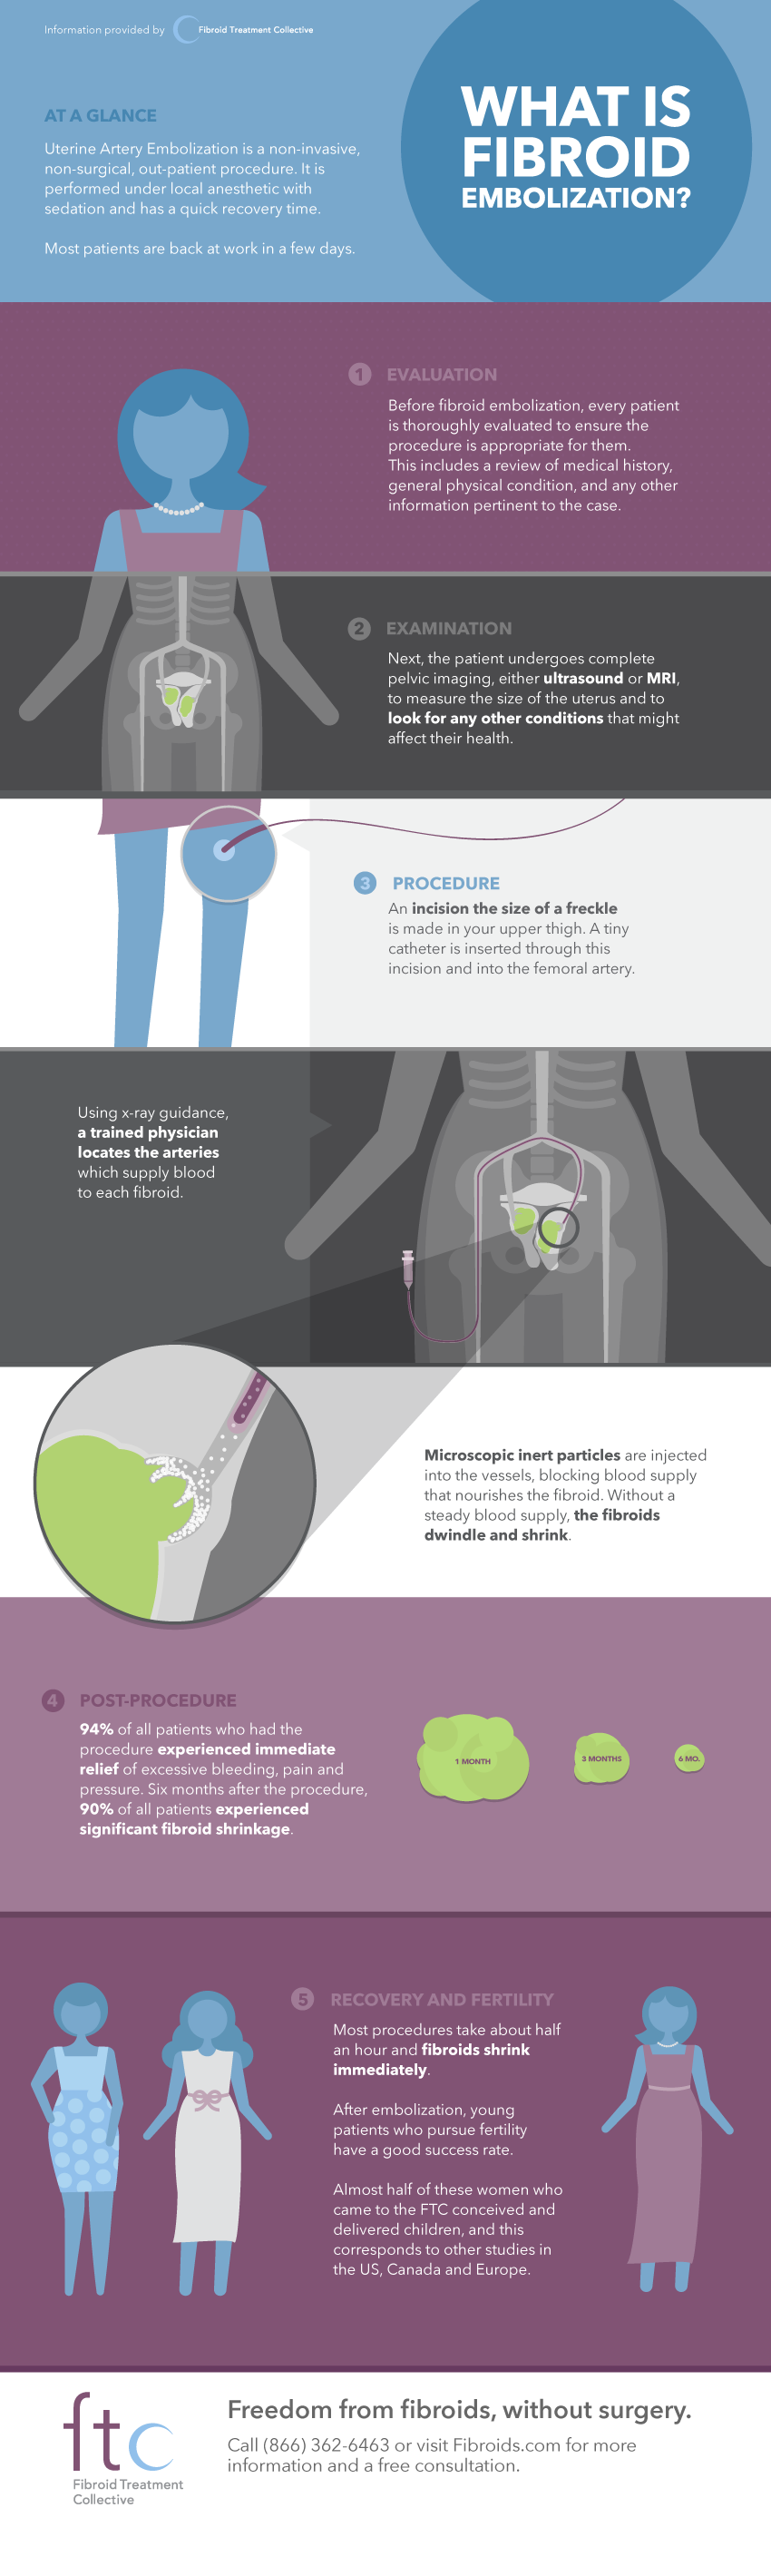 what-is-fibroid-embolization-infographic